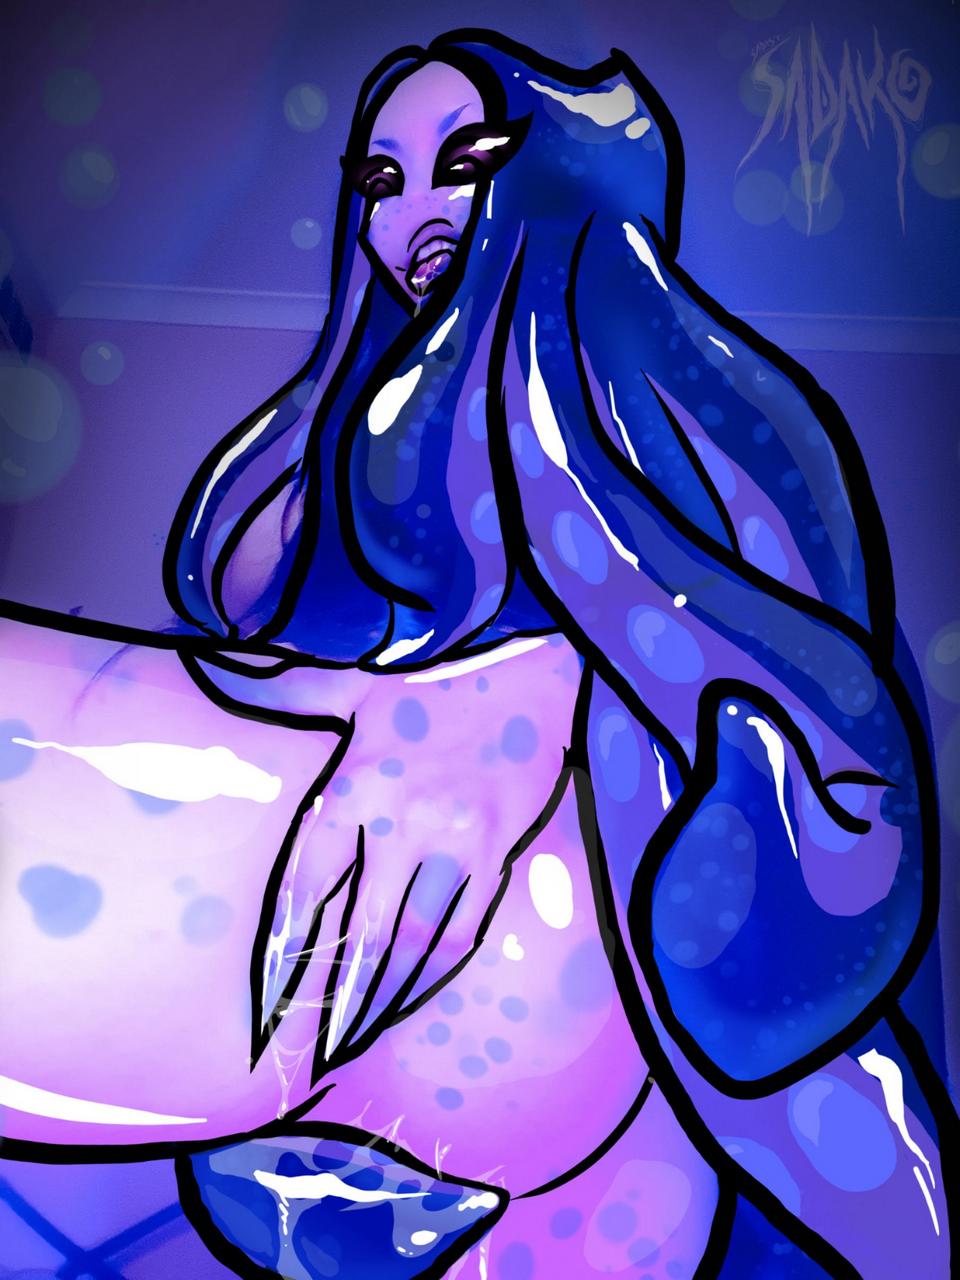 Squishy Slimy Tentacle Girl For This Months Sketc